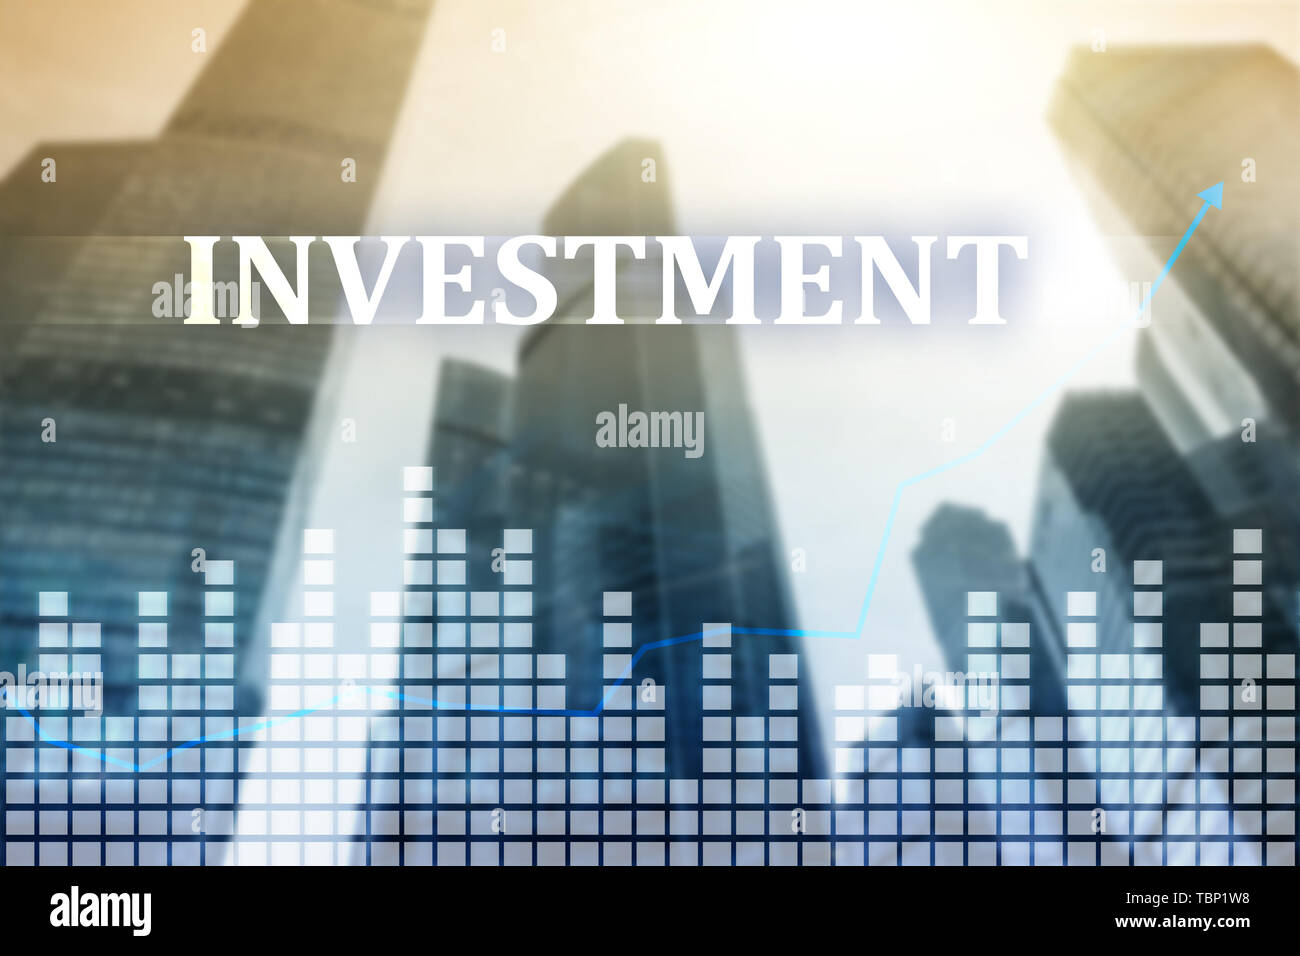 Investment, ROI, financial market concept. Stock Photo